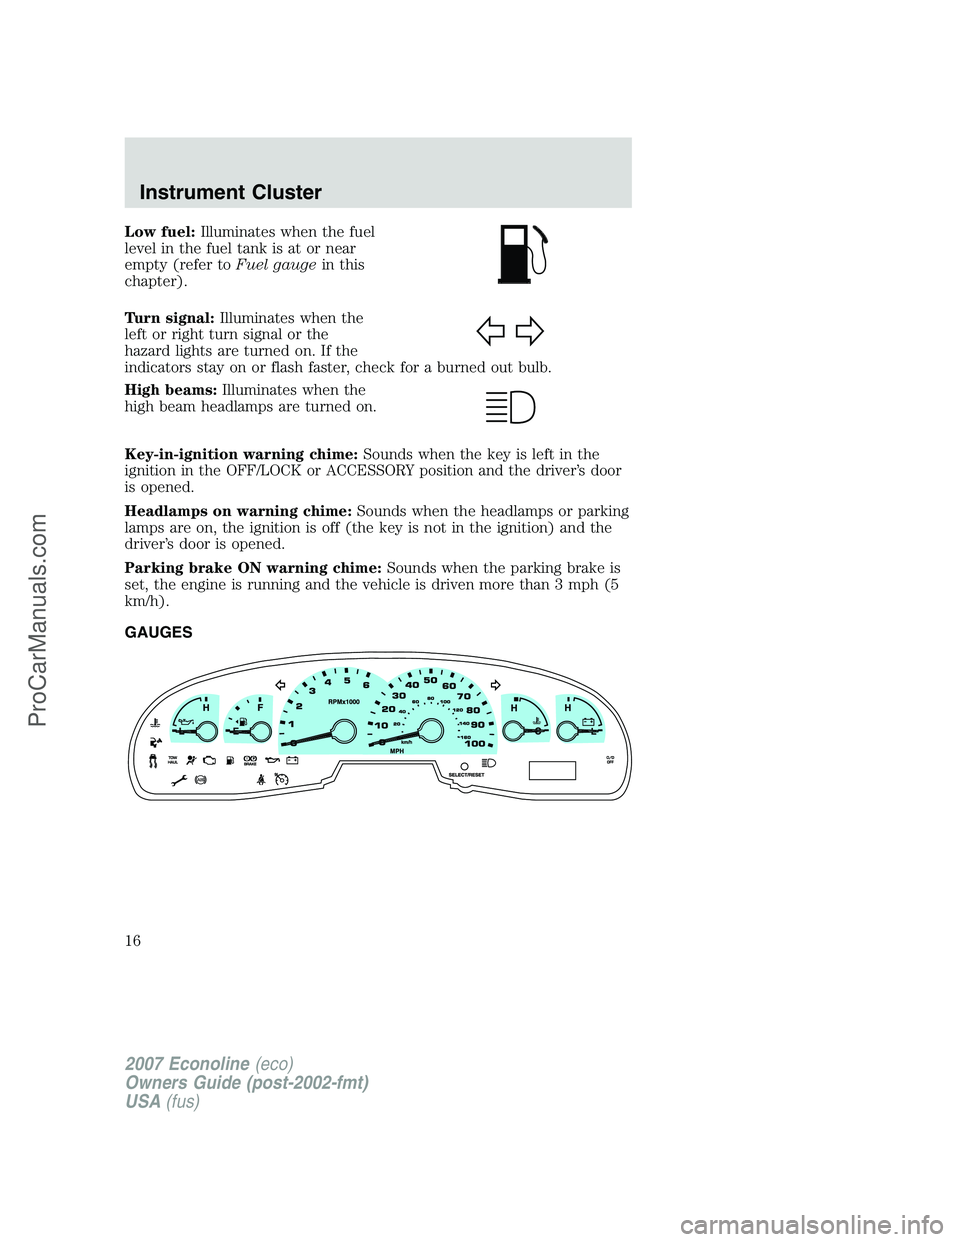 FORD E-150 2007  Owners Manual Low fuel:Illuminates when the fuel
level in the fuel tank is at or near
empty (refer toFuel gaugein this
chapter).
Turn signal:Illuminates when the
left or right turn signal or the
hazard lights are t